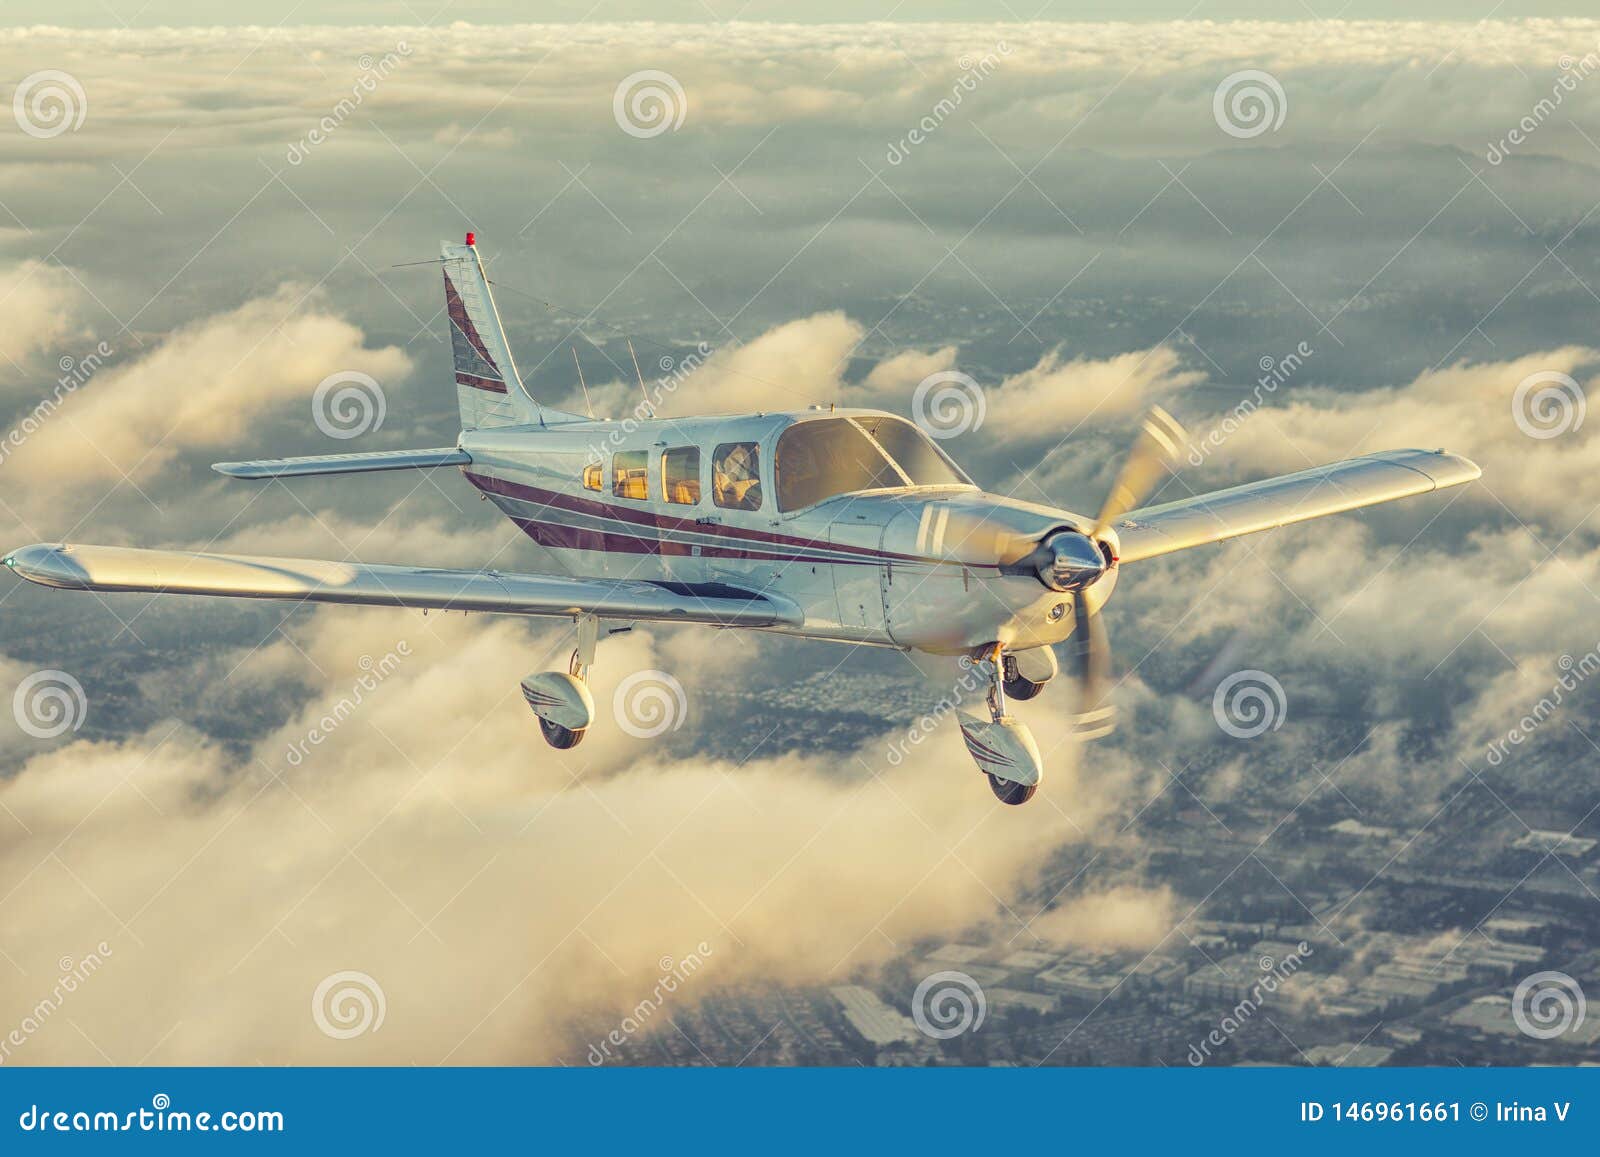 small single engine airplane flying in the gorgeous sunset sky through the sea of clouds above the spectacular mountains